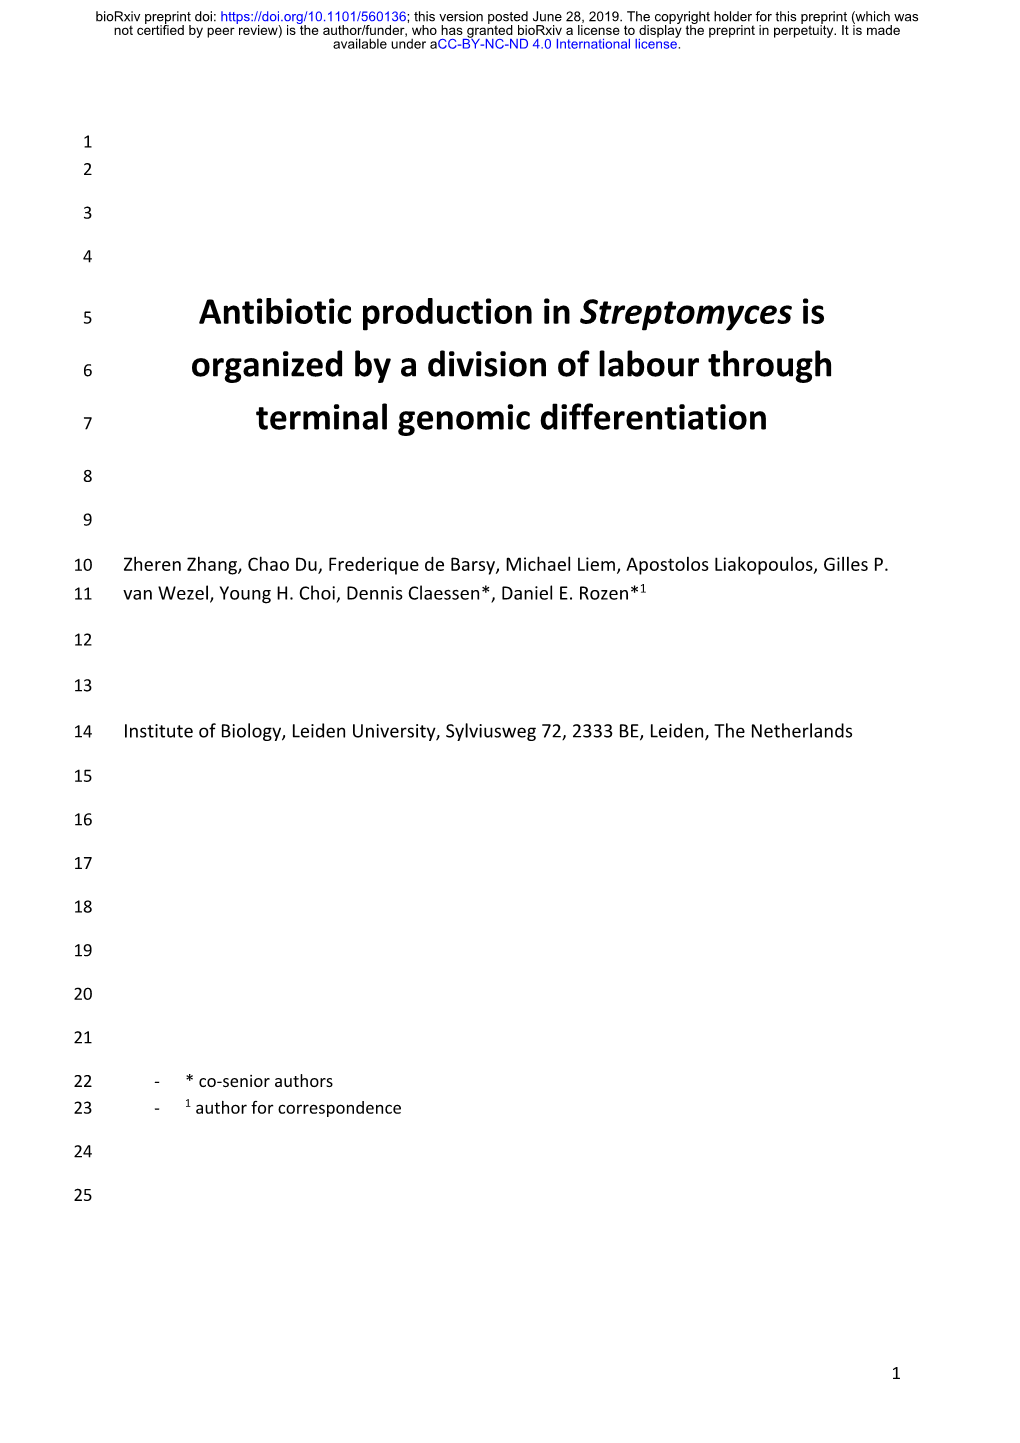 Antibiotic Production in Streptomyces Is Organized by a Division of Labour Through Terminal Genomic Differentiation